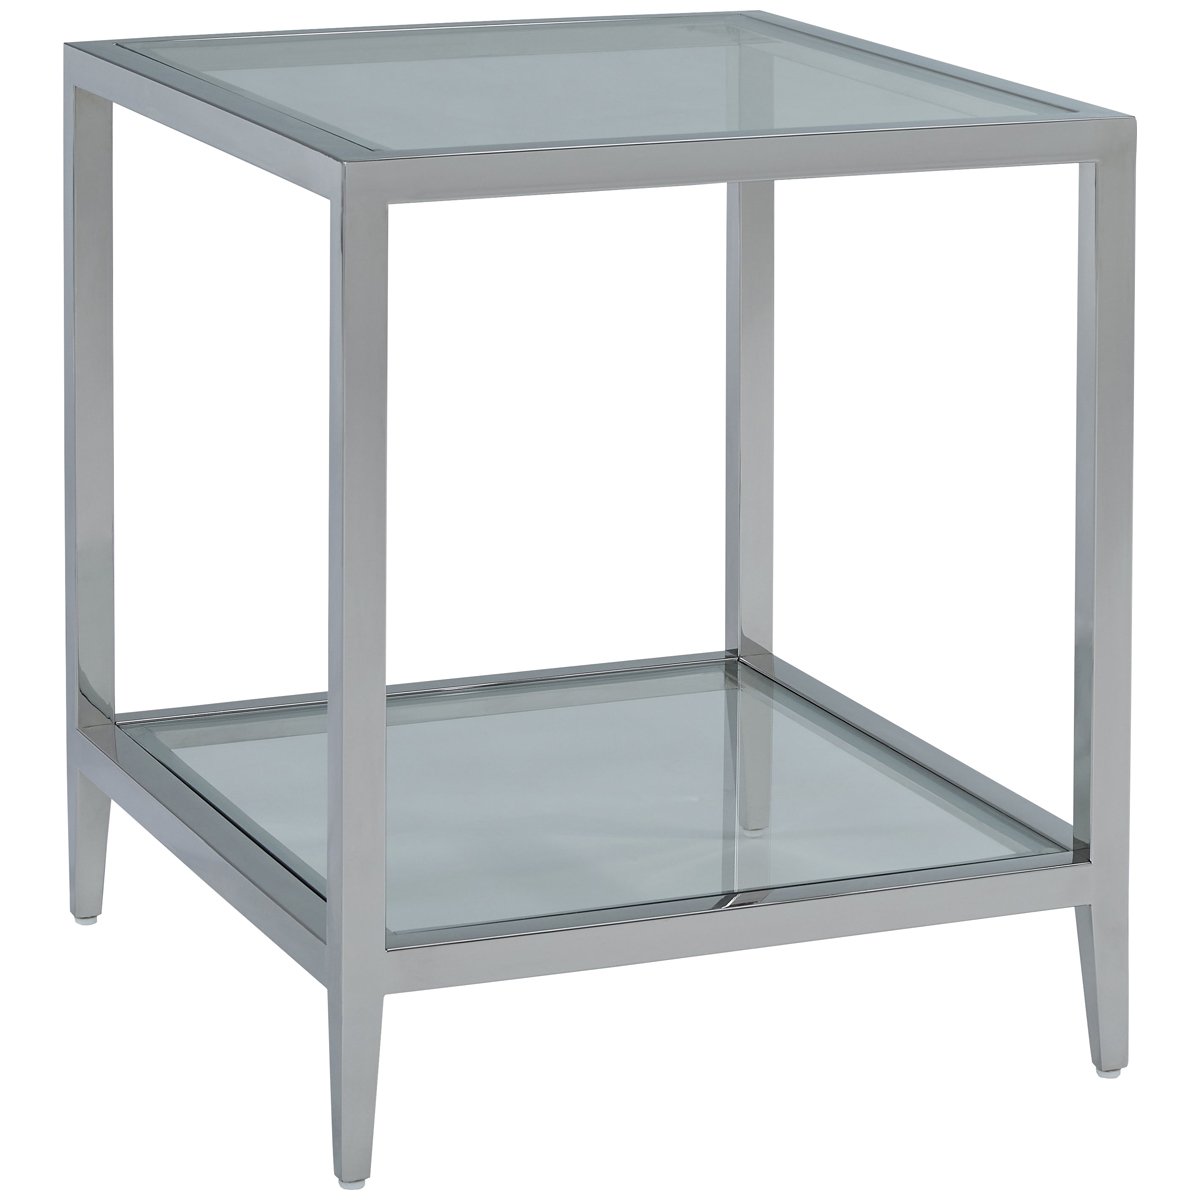 Belle Meade Signature Pinnacle End Table